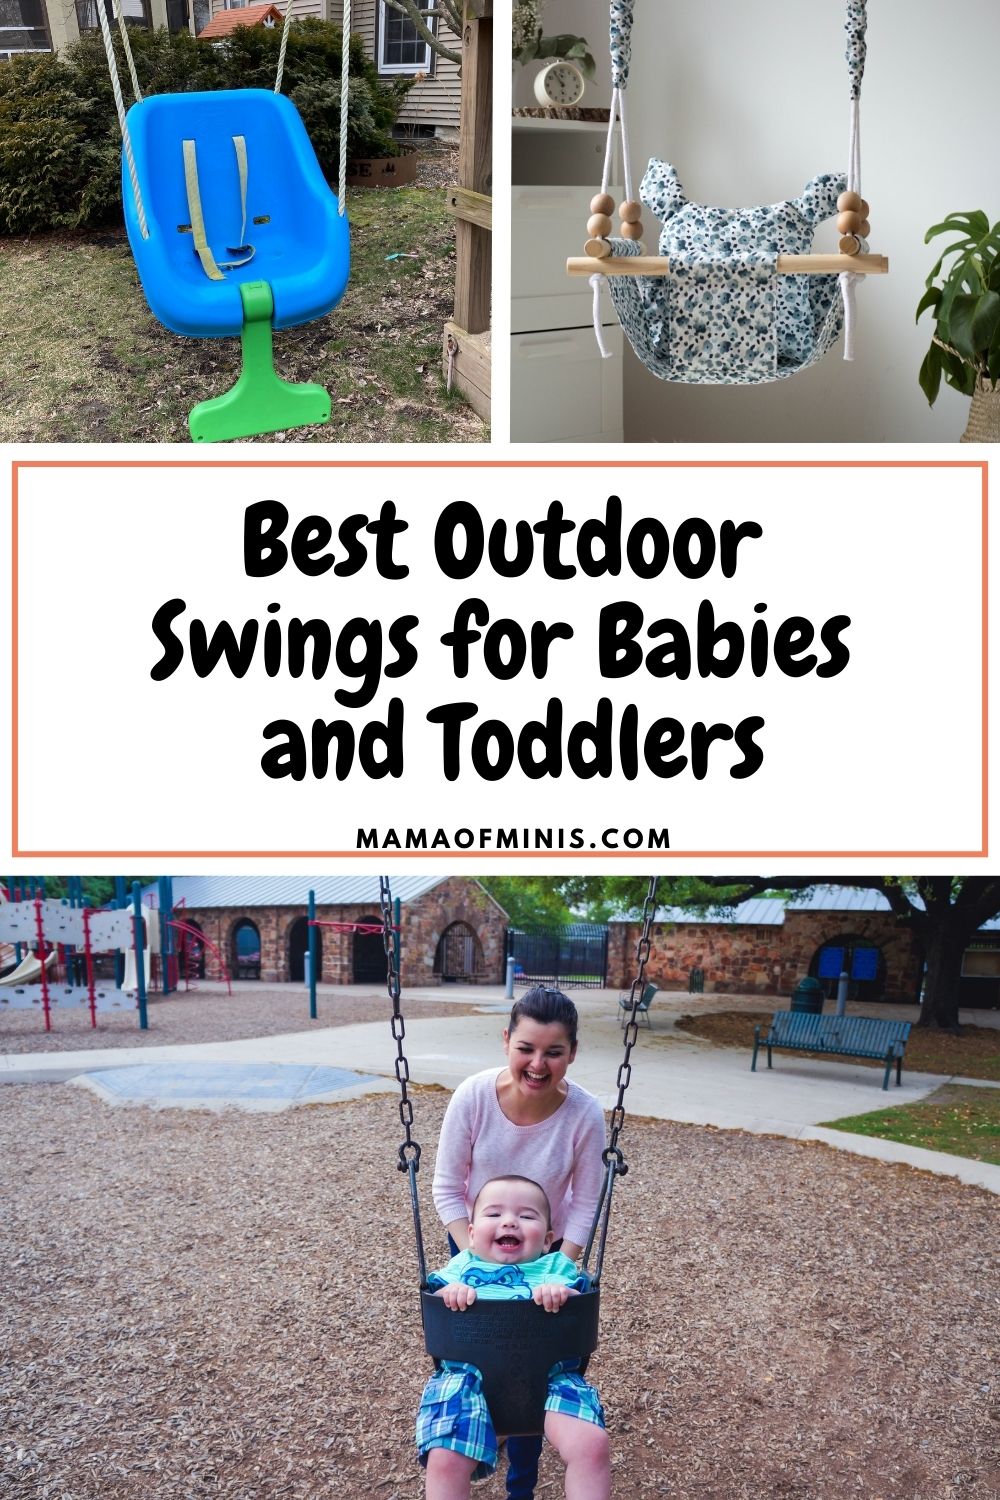 Best Outdoor Swings for Babies and Toddlers